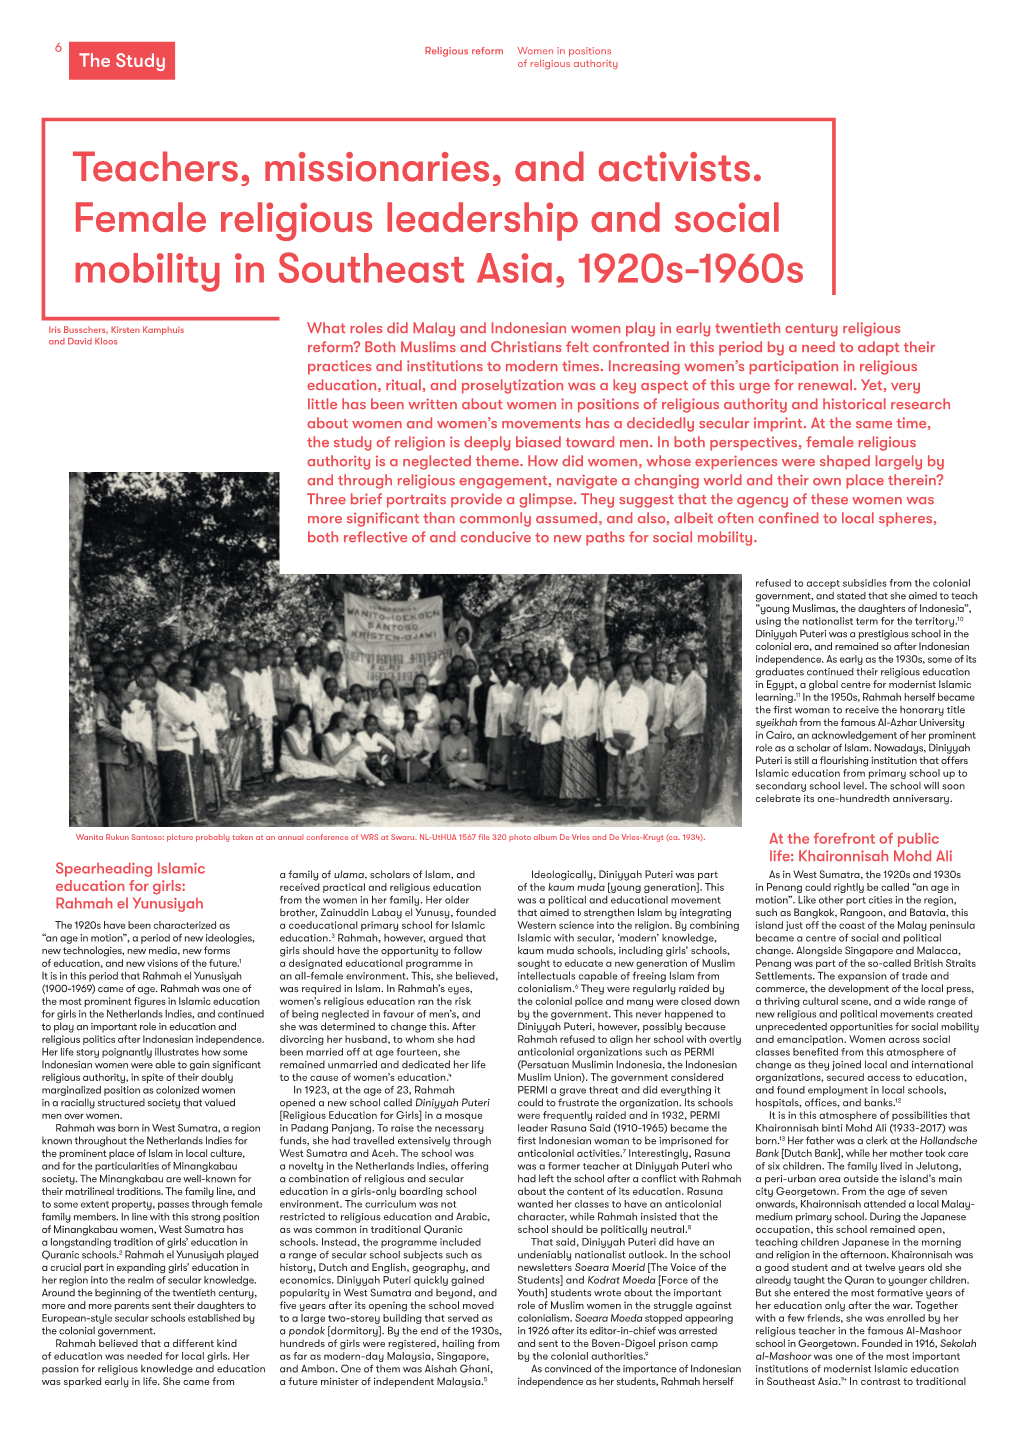 Teachers, Missionaries, and Activists. Female Religious Leadership and Social Mobility in Southeast Asia, 1920S-1960S